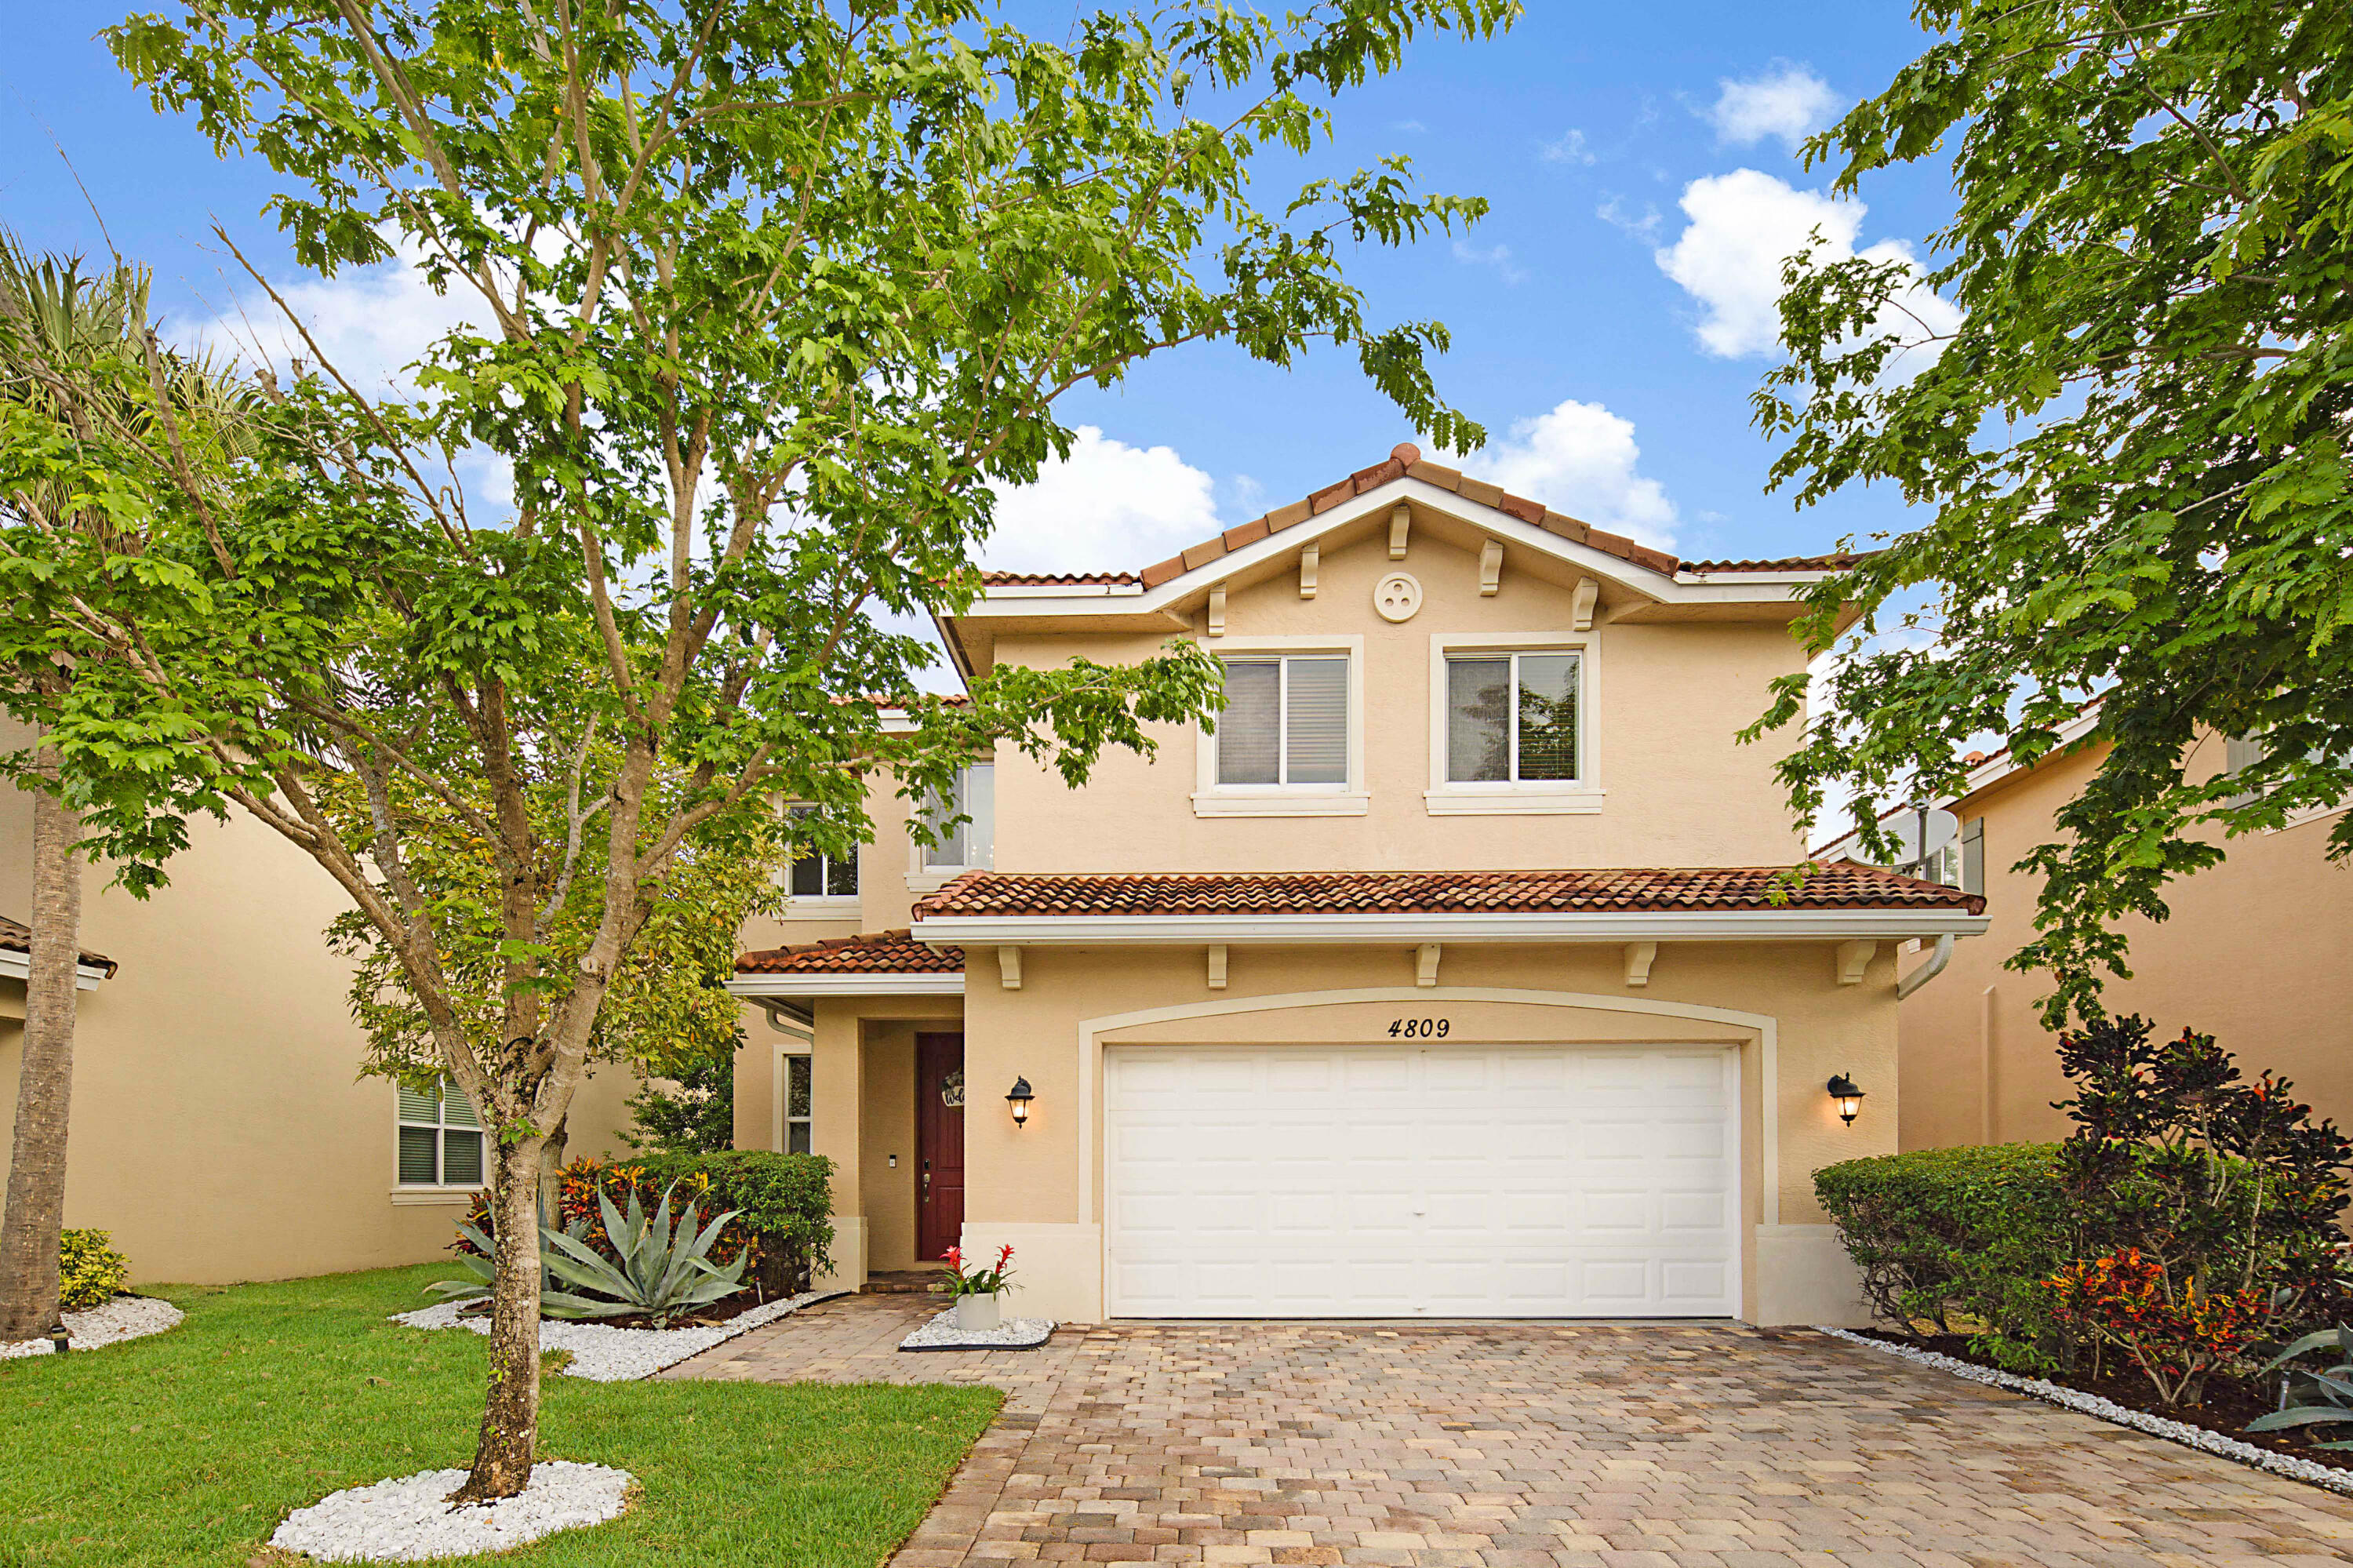 4809 Foxtail Palm Court, Greenacres, Palm Beach County, Florida - 4 Bedrooms  
2.5 Bathrooms - 